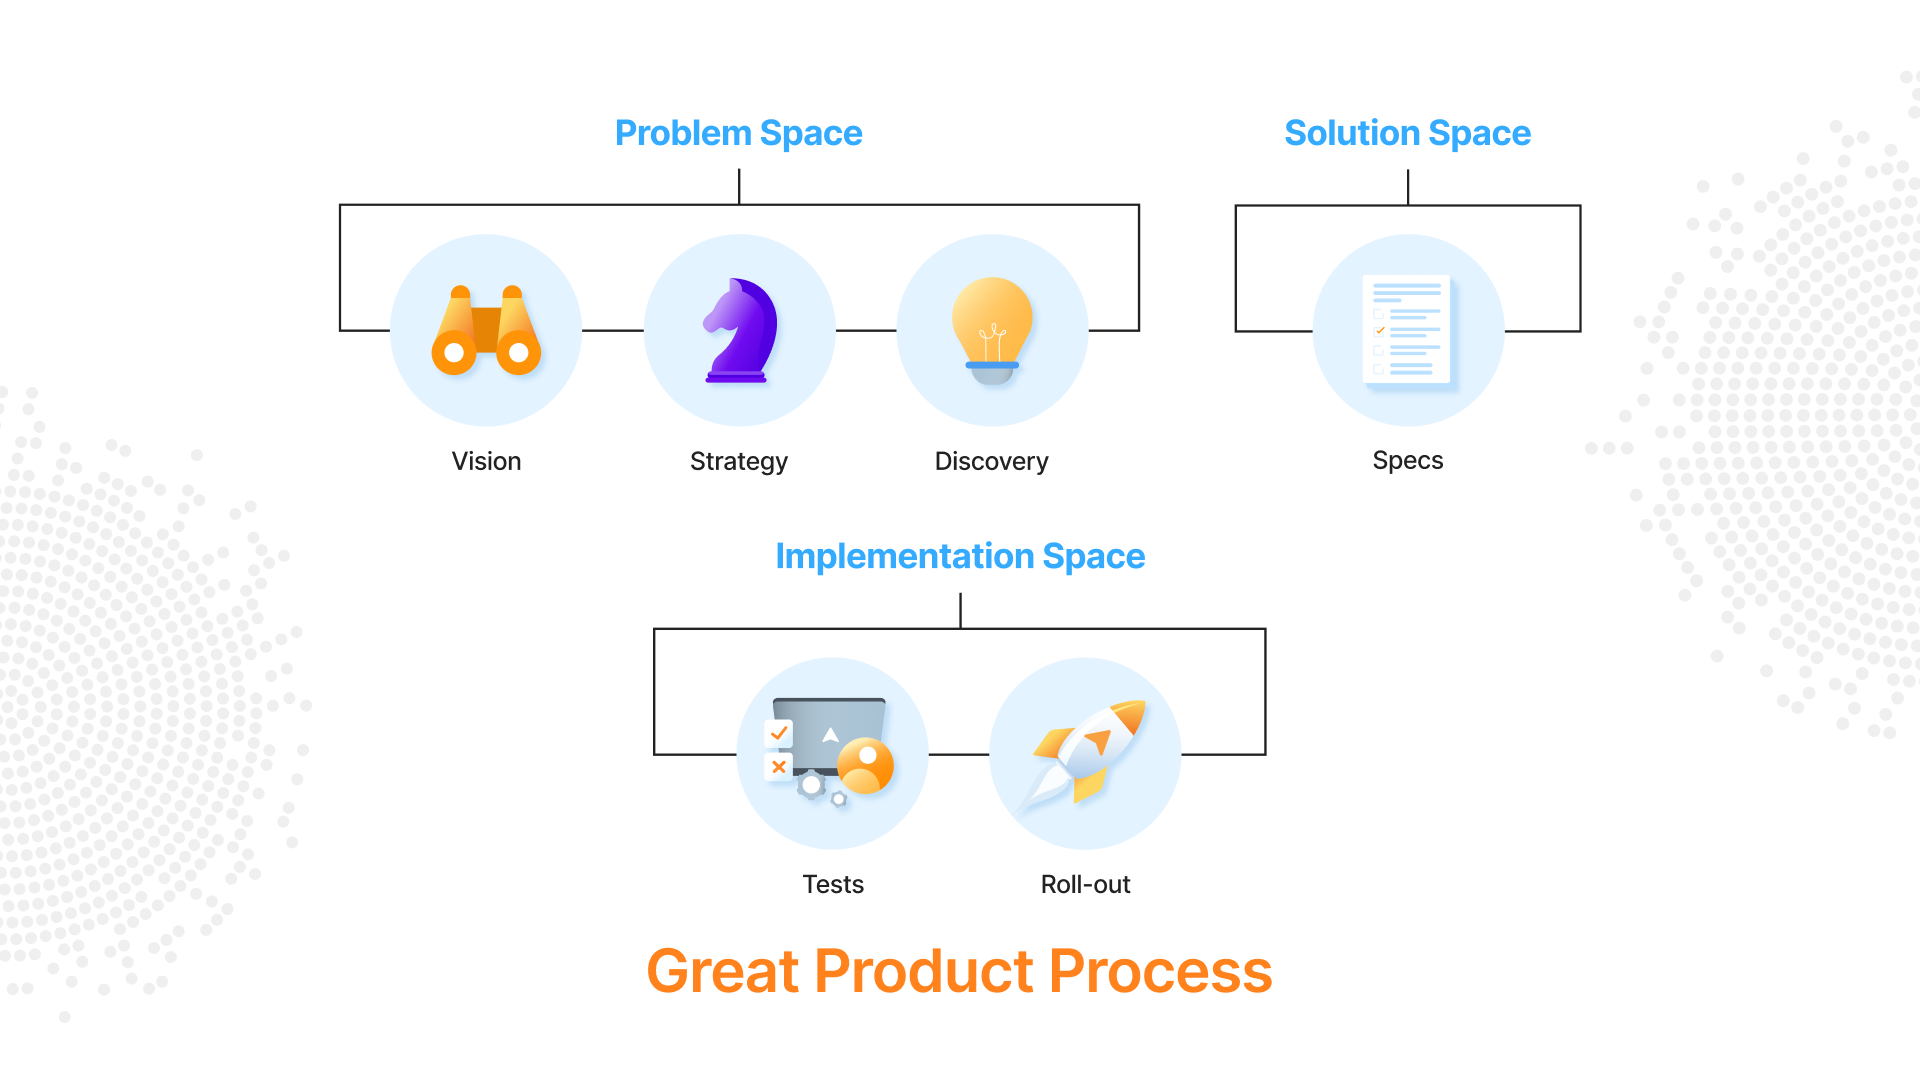 Beginners Guide to Product Management